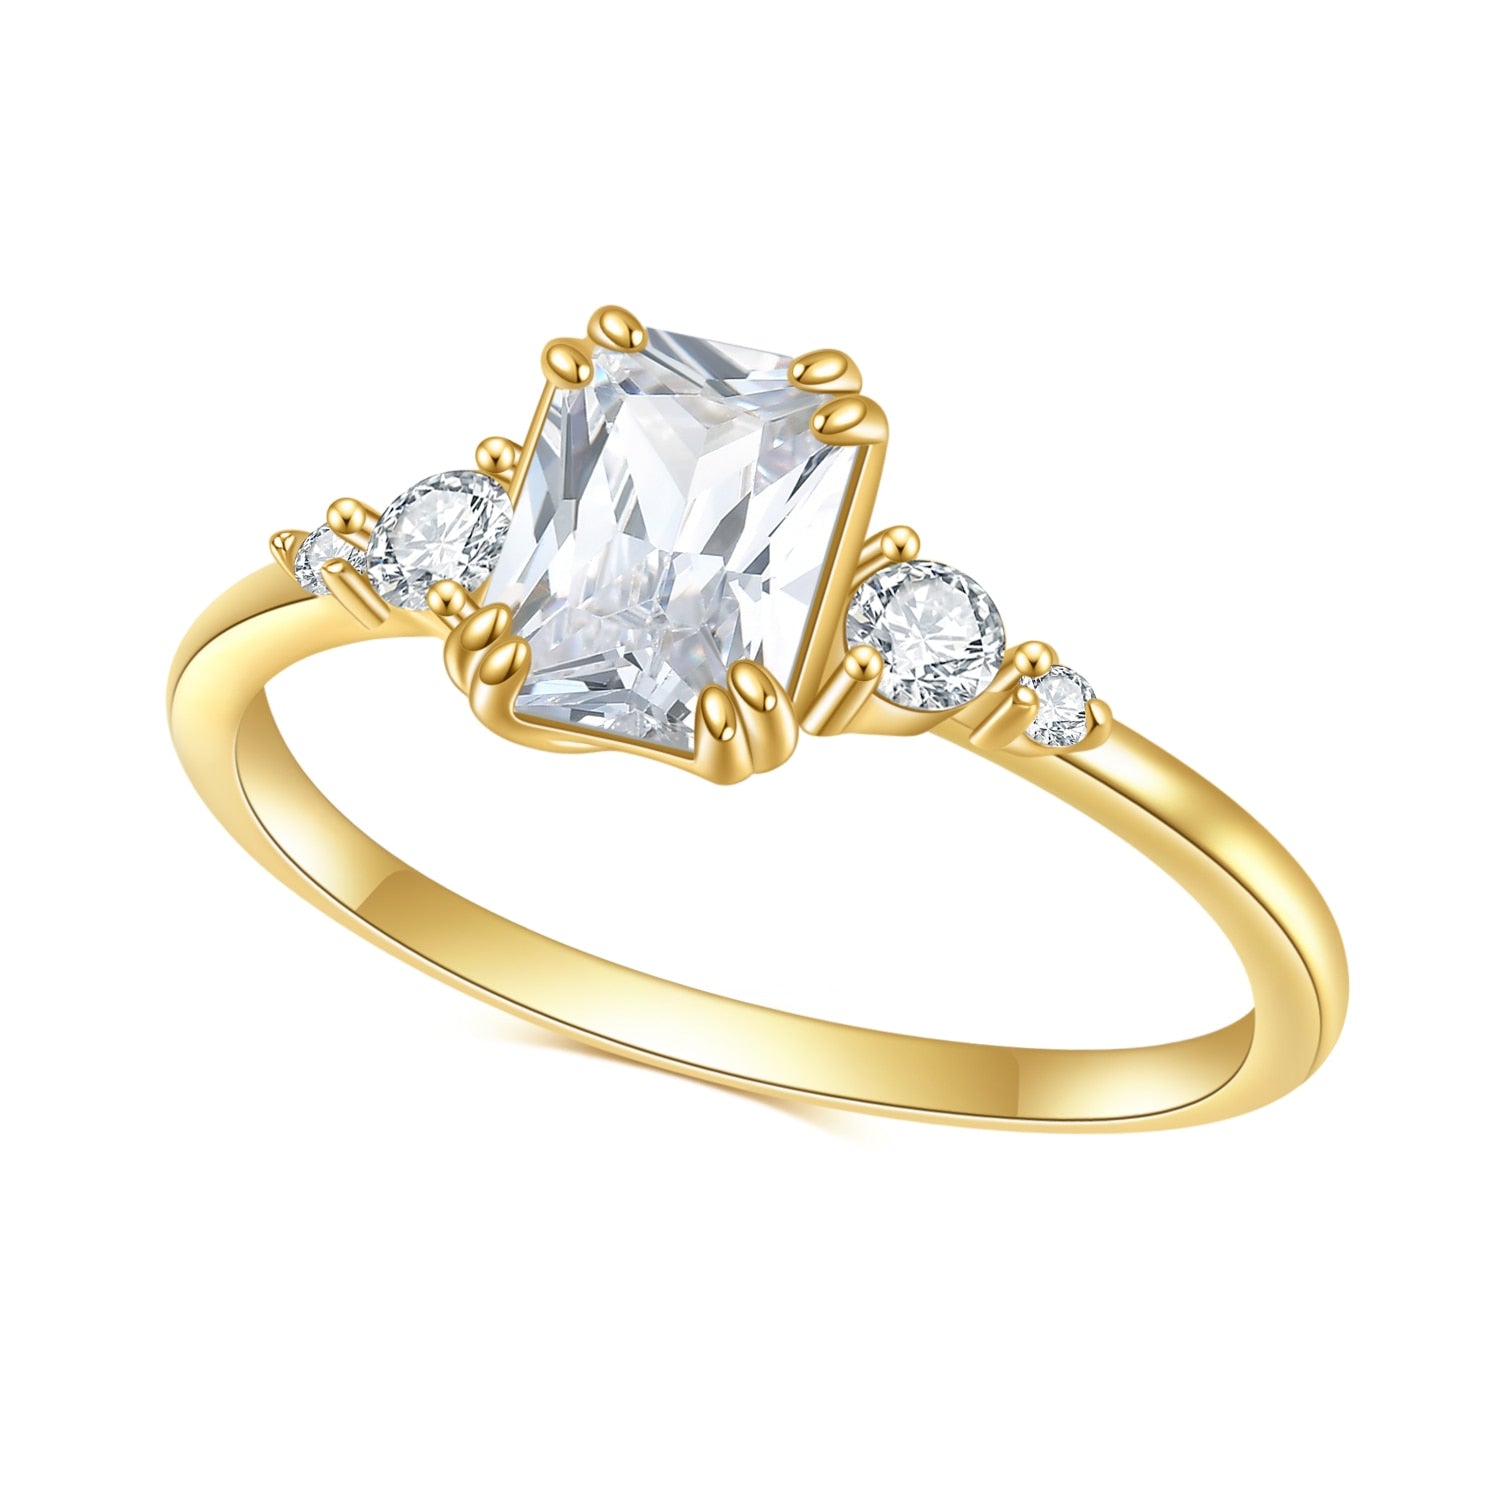 A gold ring set with a radiant cut moissanite with zircons on both sides.